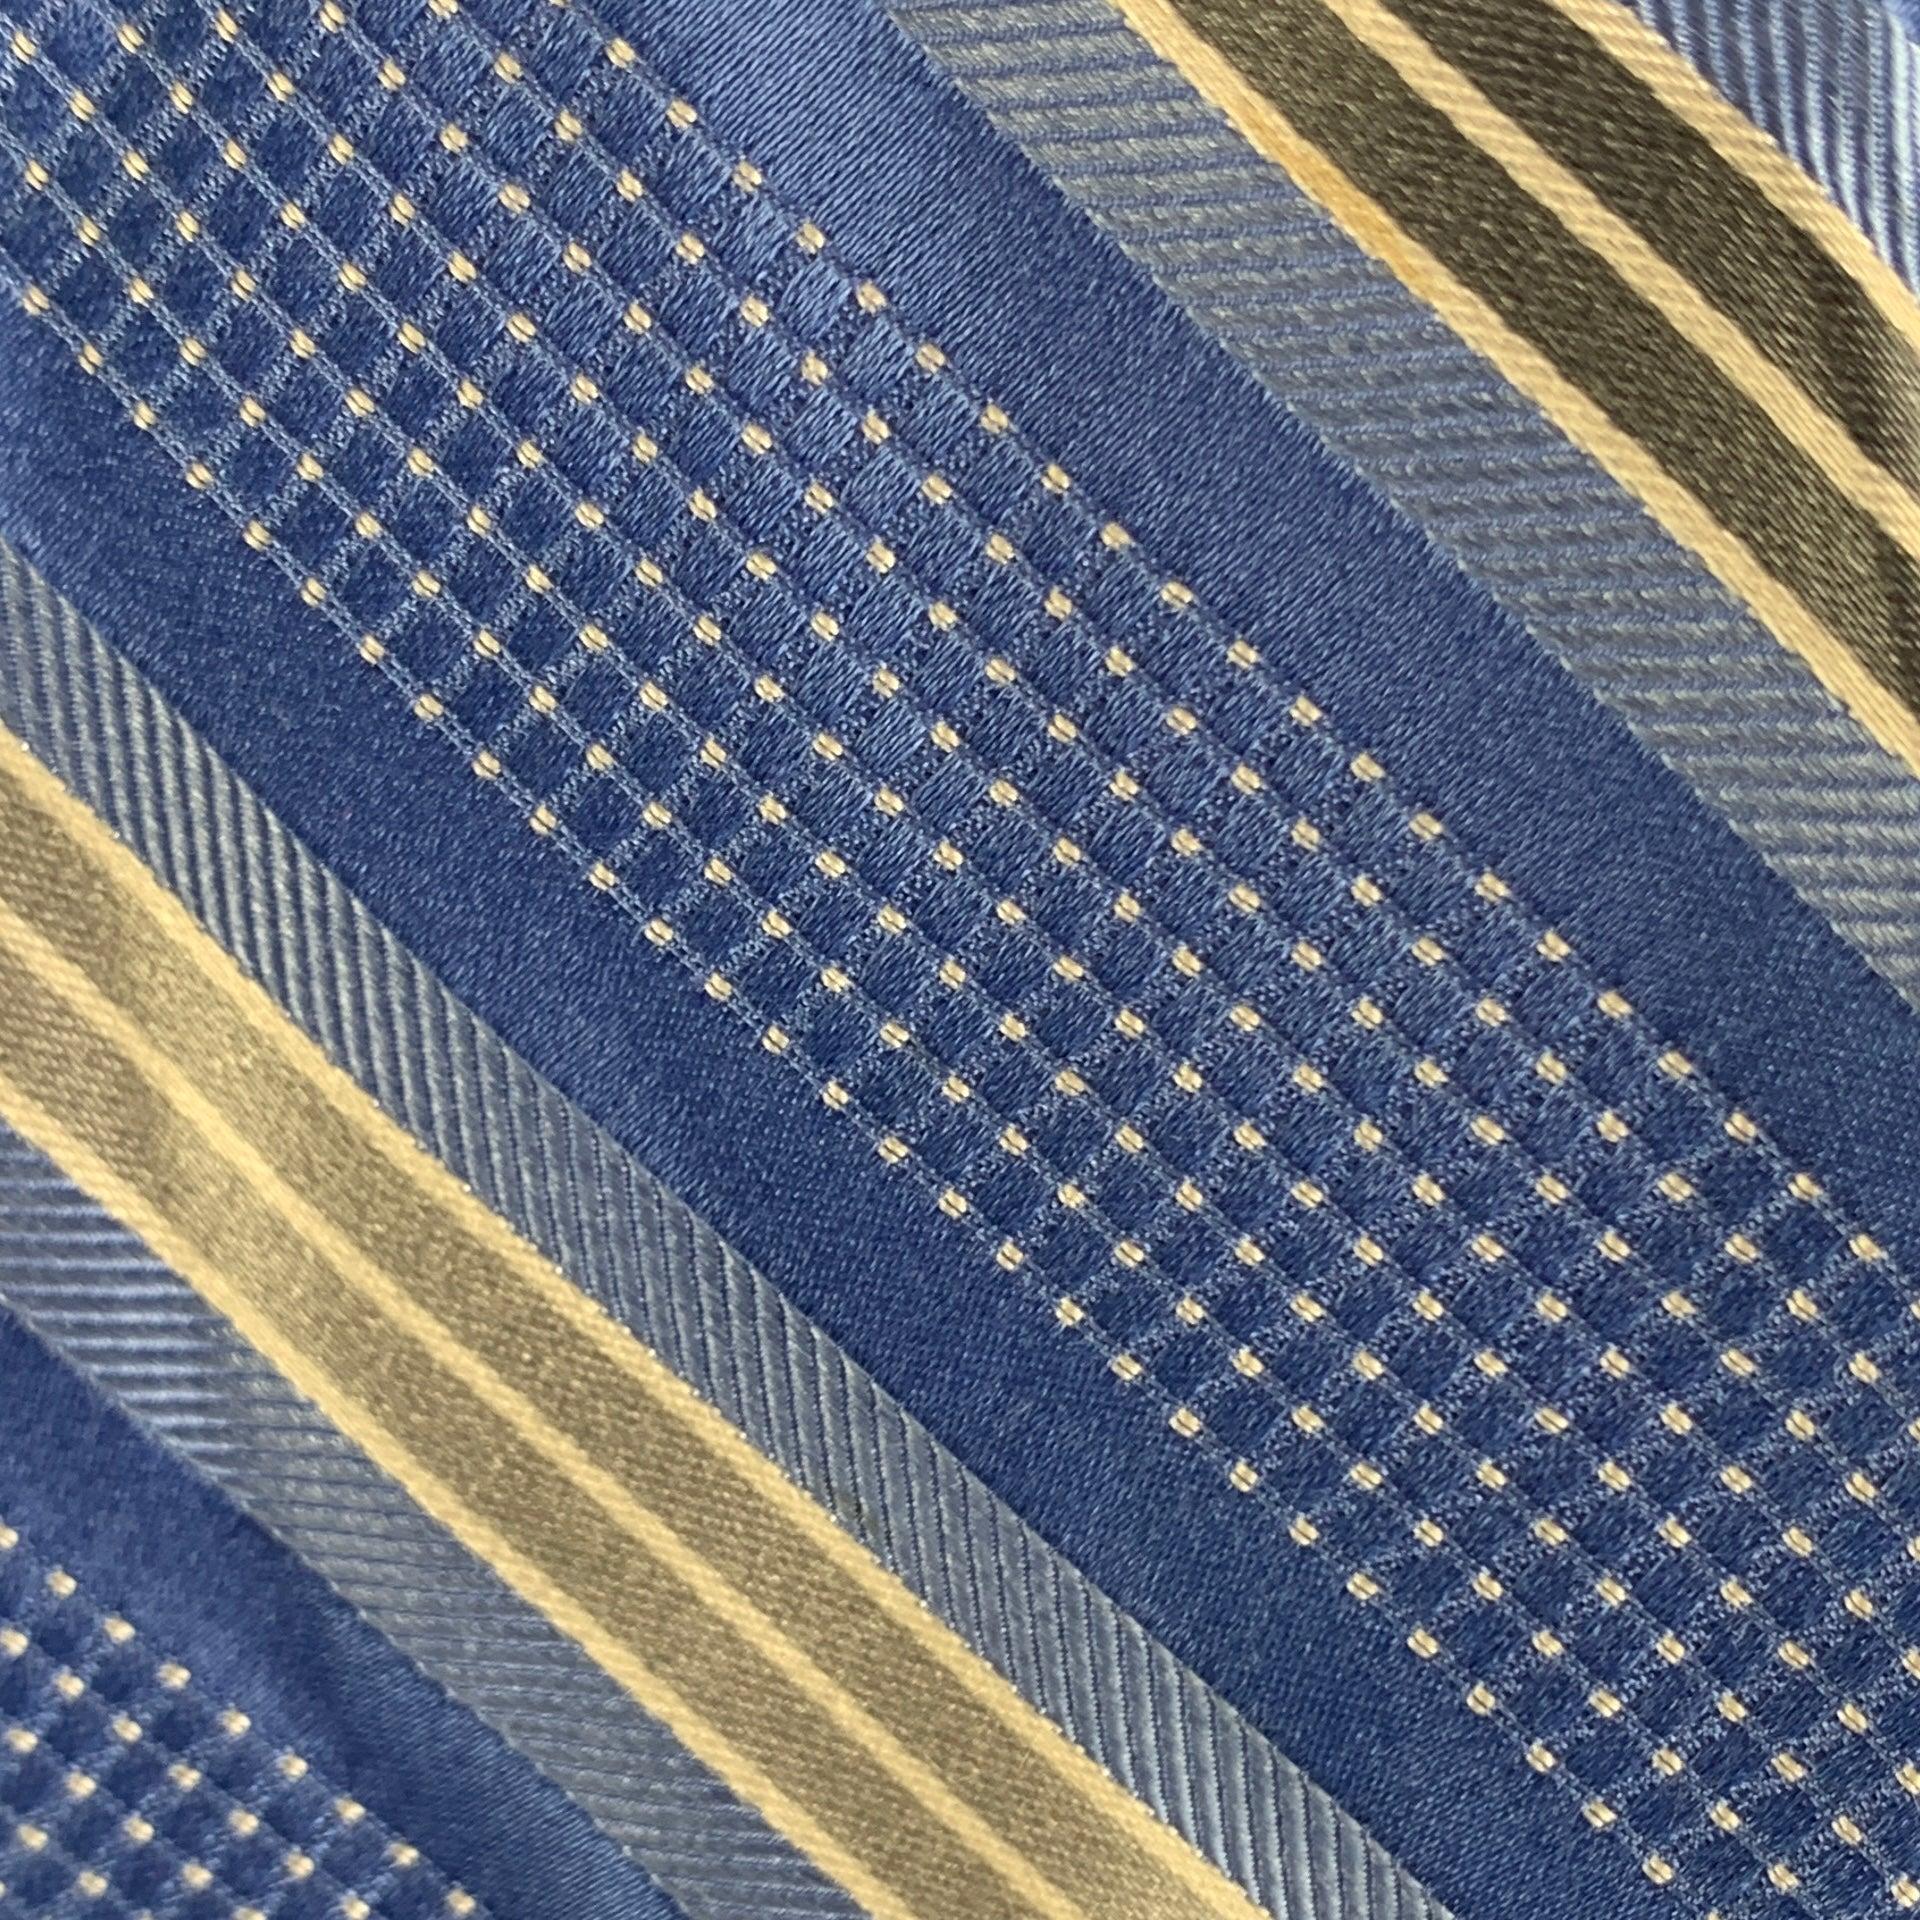 MICHAEL KORS classic necktie comes in blue and grey diagonal stripes & polka dots. 100% silk.
Very Good Pre-Owned Condition.
 

Measurements: 
  Width: 3 inches Length: 58 inches 




  
  
 
Reference: 123662
Category: Tie
More Details
    
Brand: 